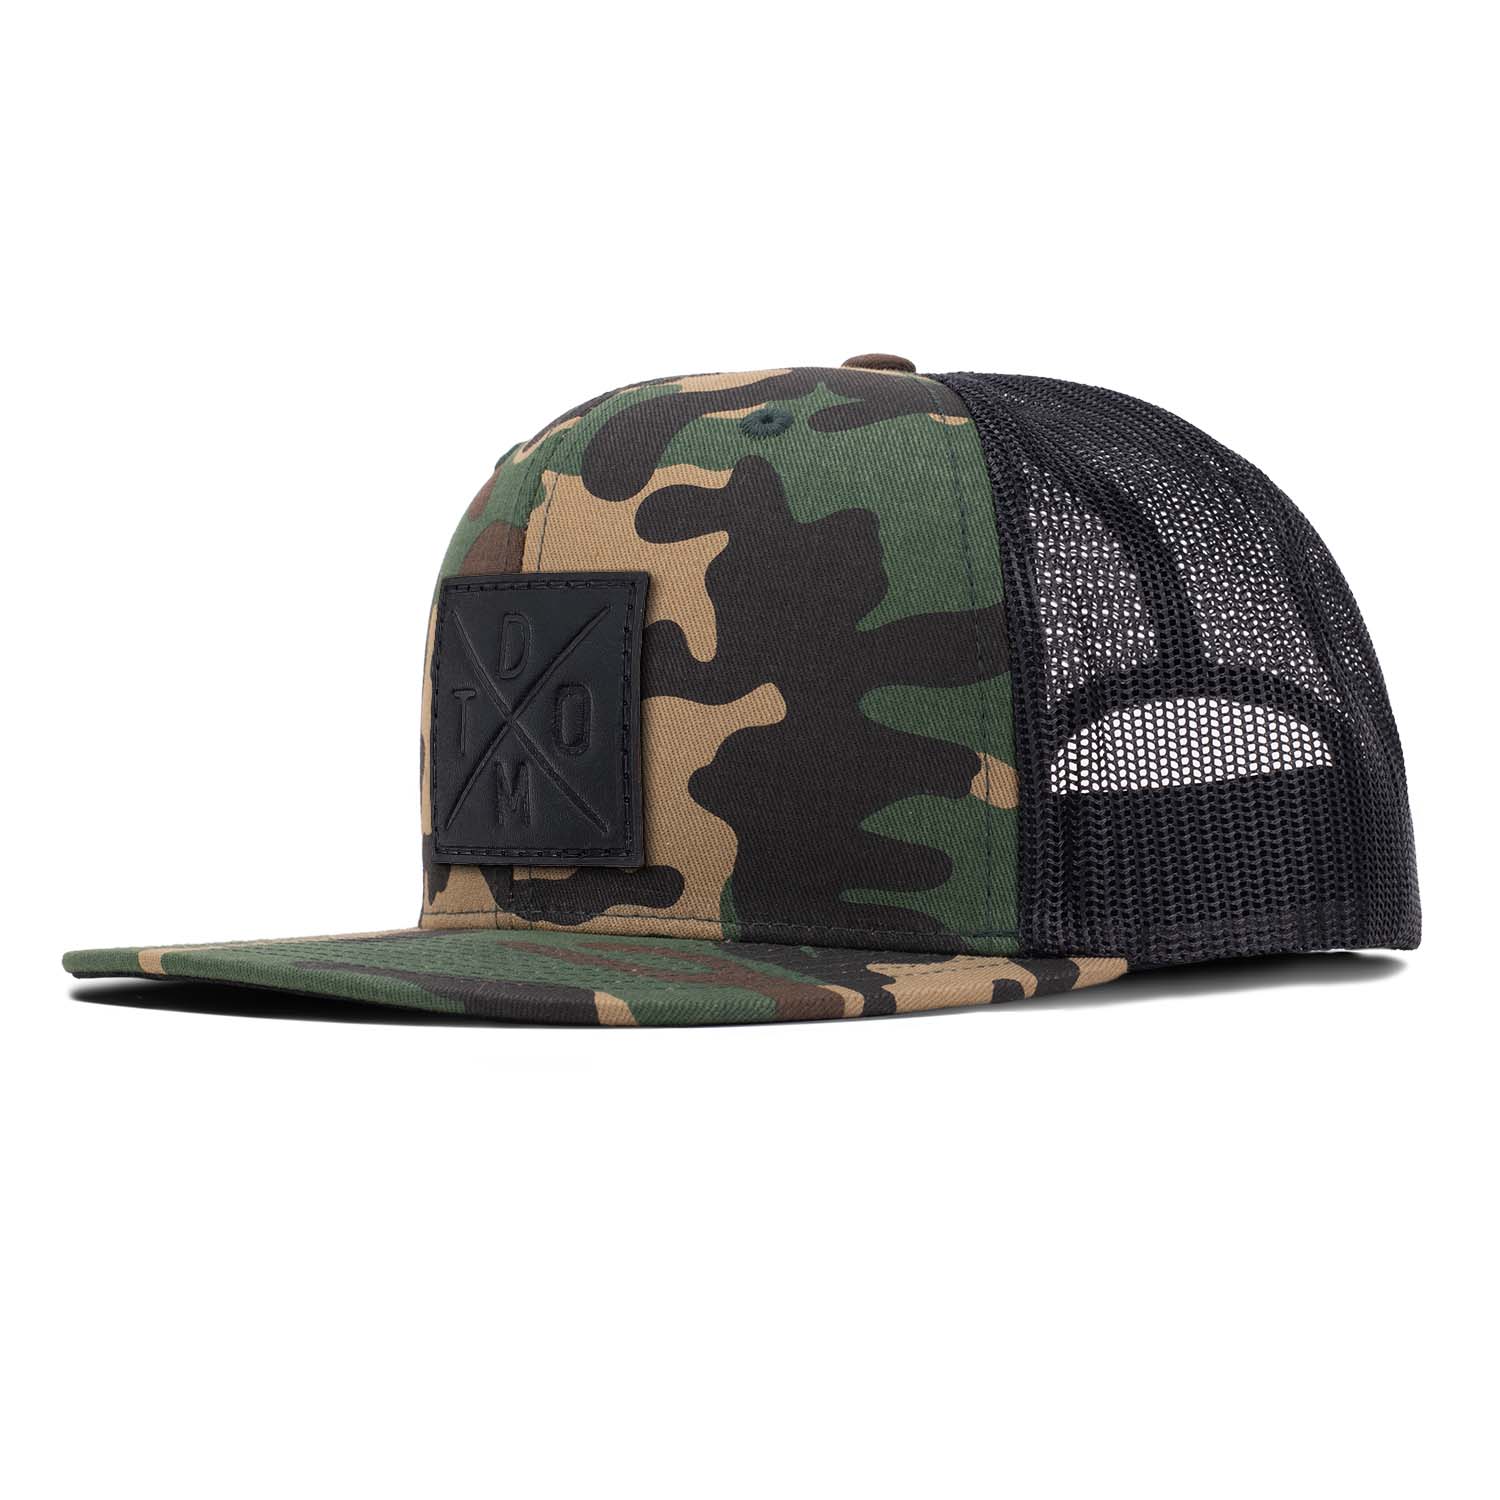 Black full grain leather debossed square DTOM patch on a woodland camo flat bill hat with black mesh